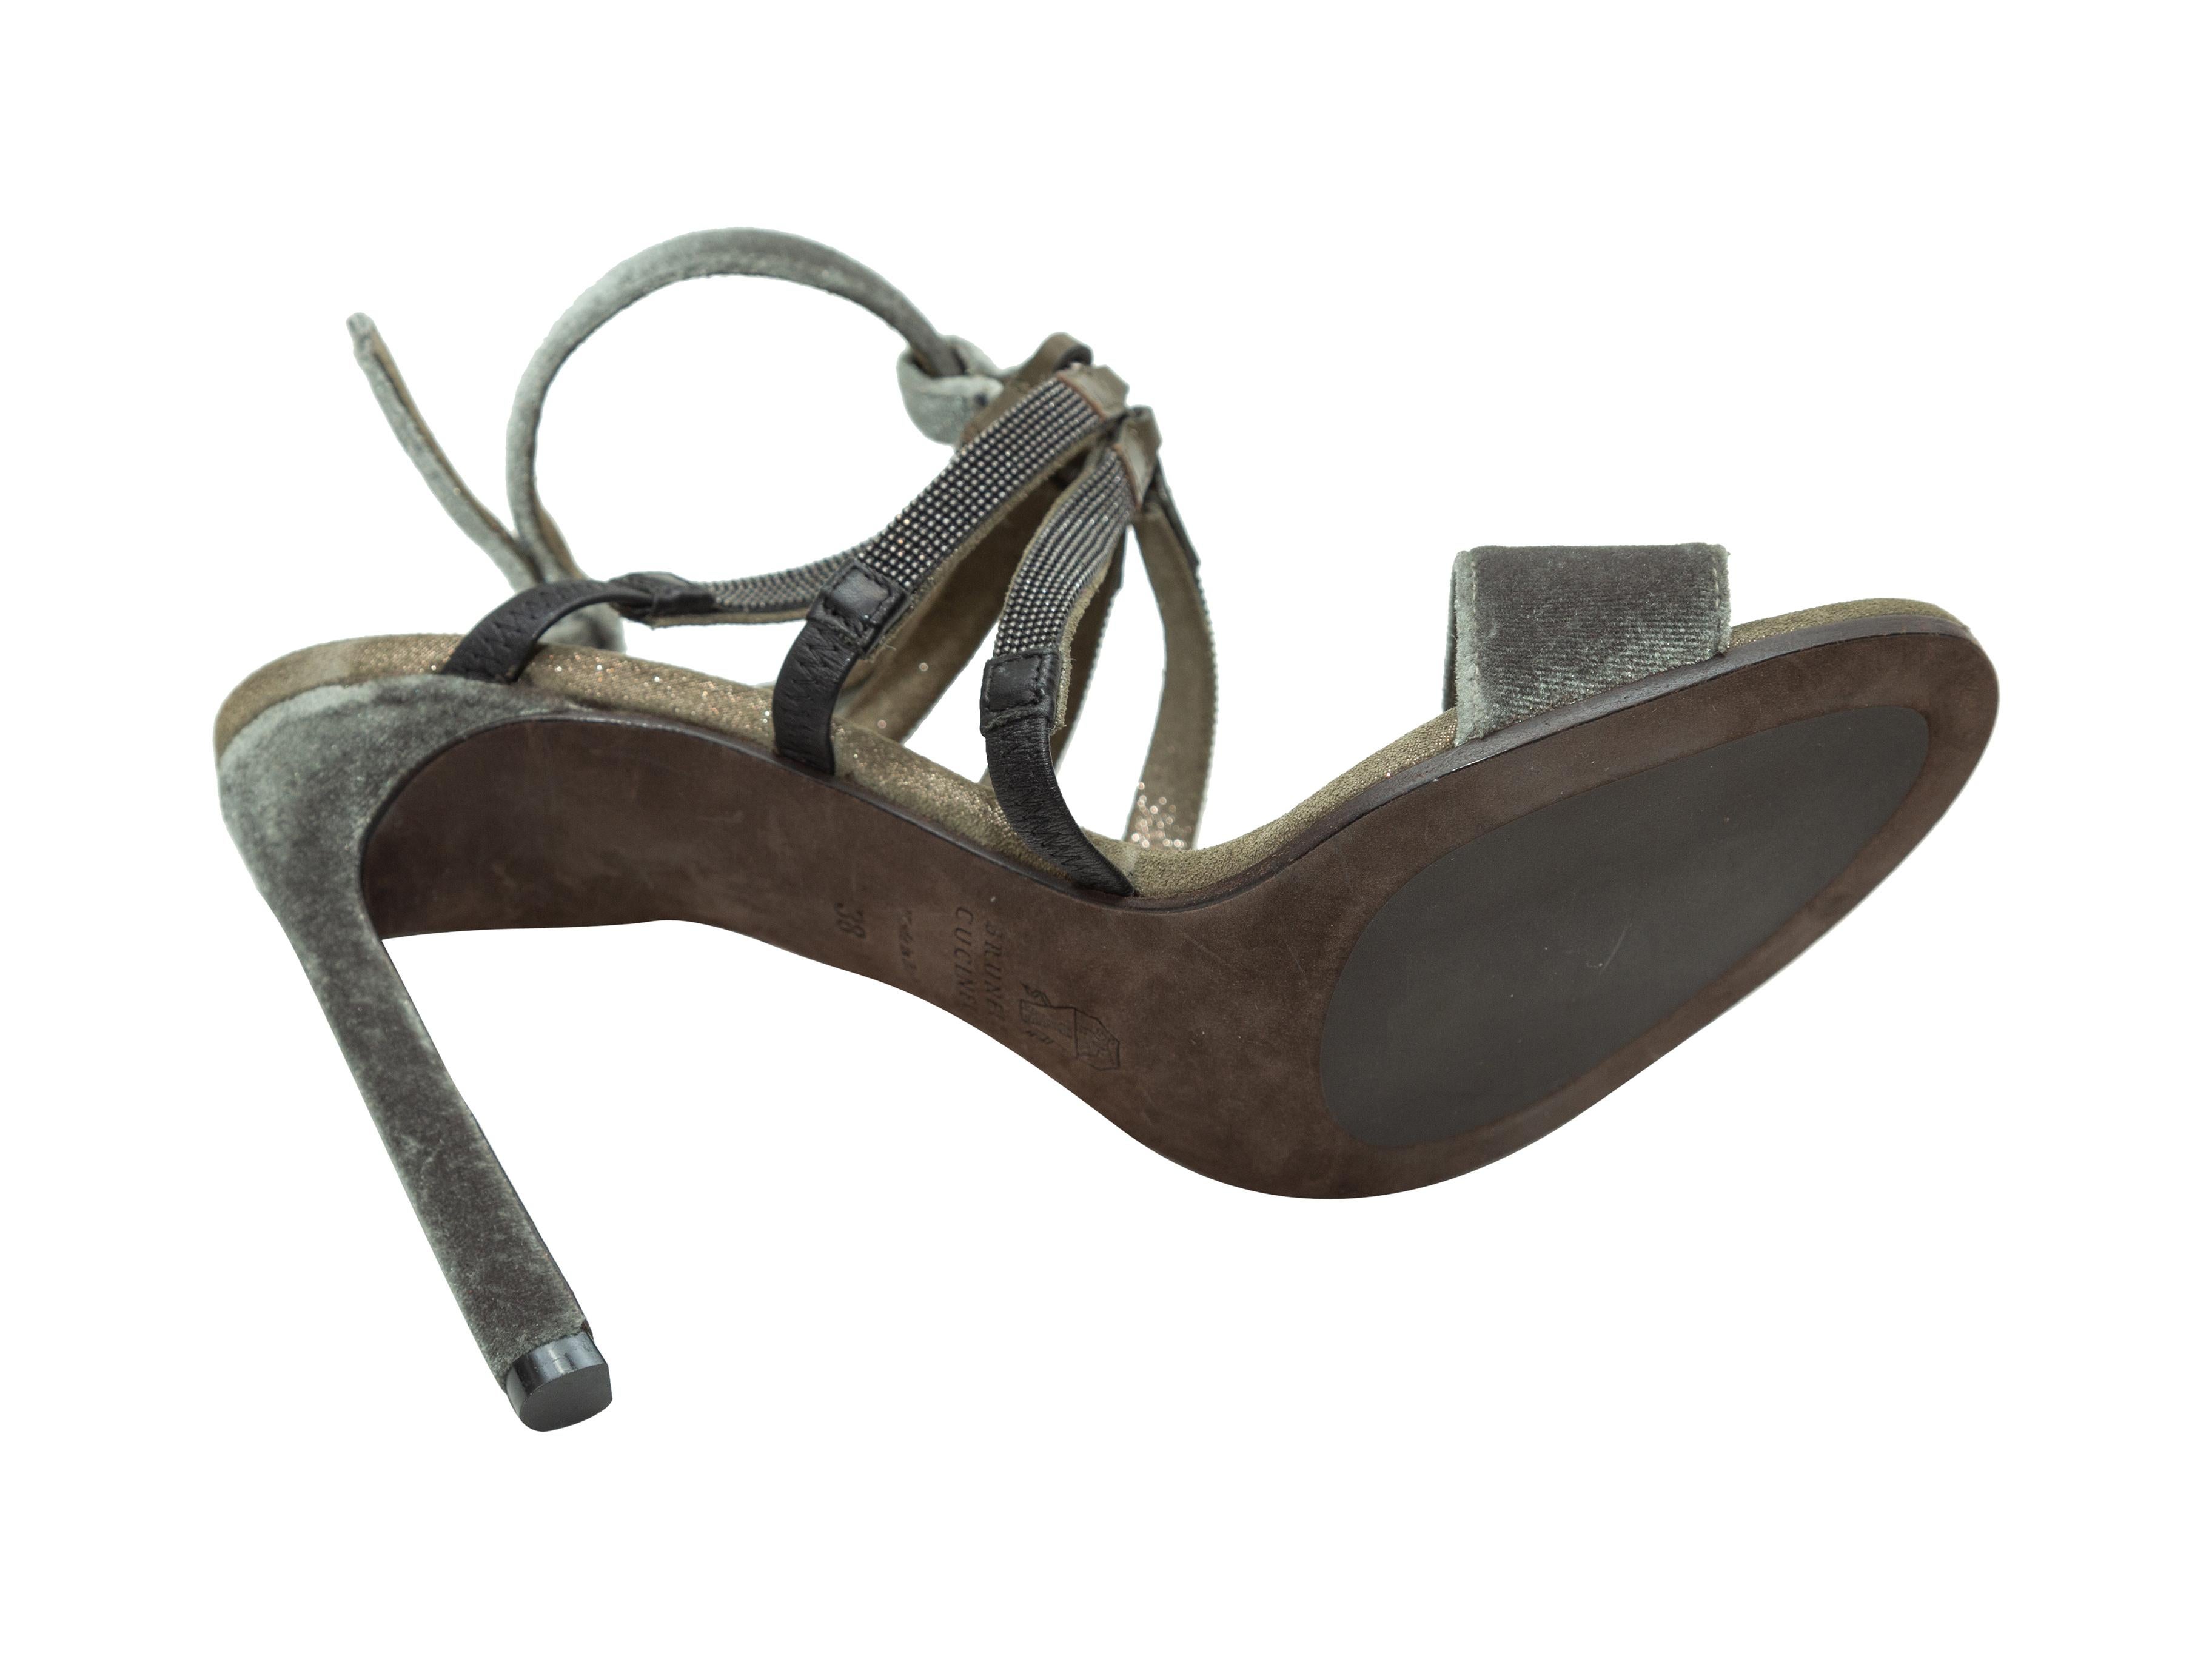 Product details: Olive green velvet sandals by Brunello Cucinelli. Silver-tone Monili embellishments at tops. Buckle closures at ankles.
Condition: Pre-owned. Very good.
Est. Retail $ 922.00